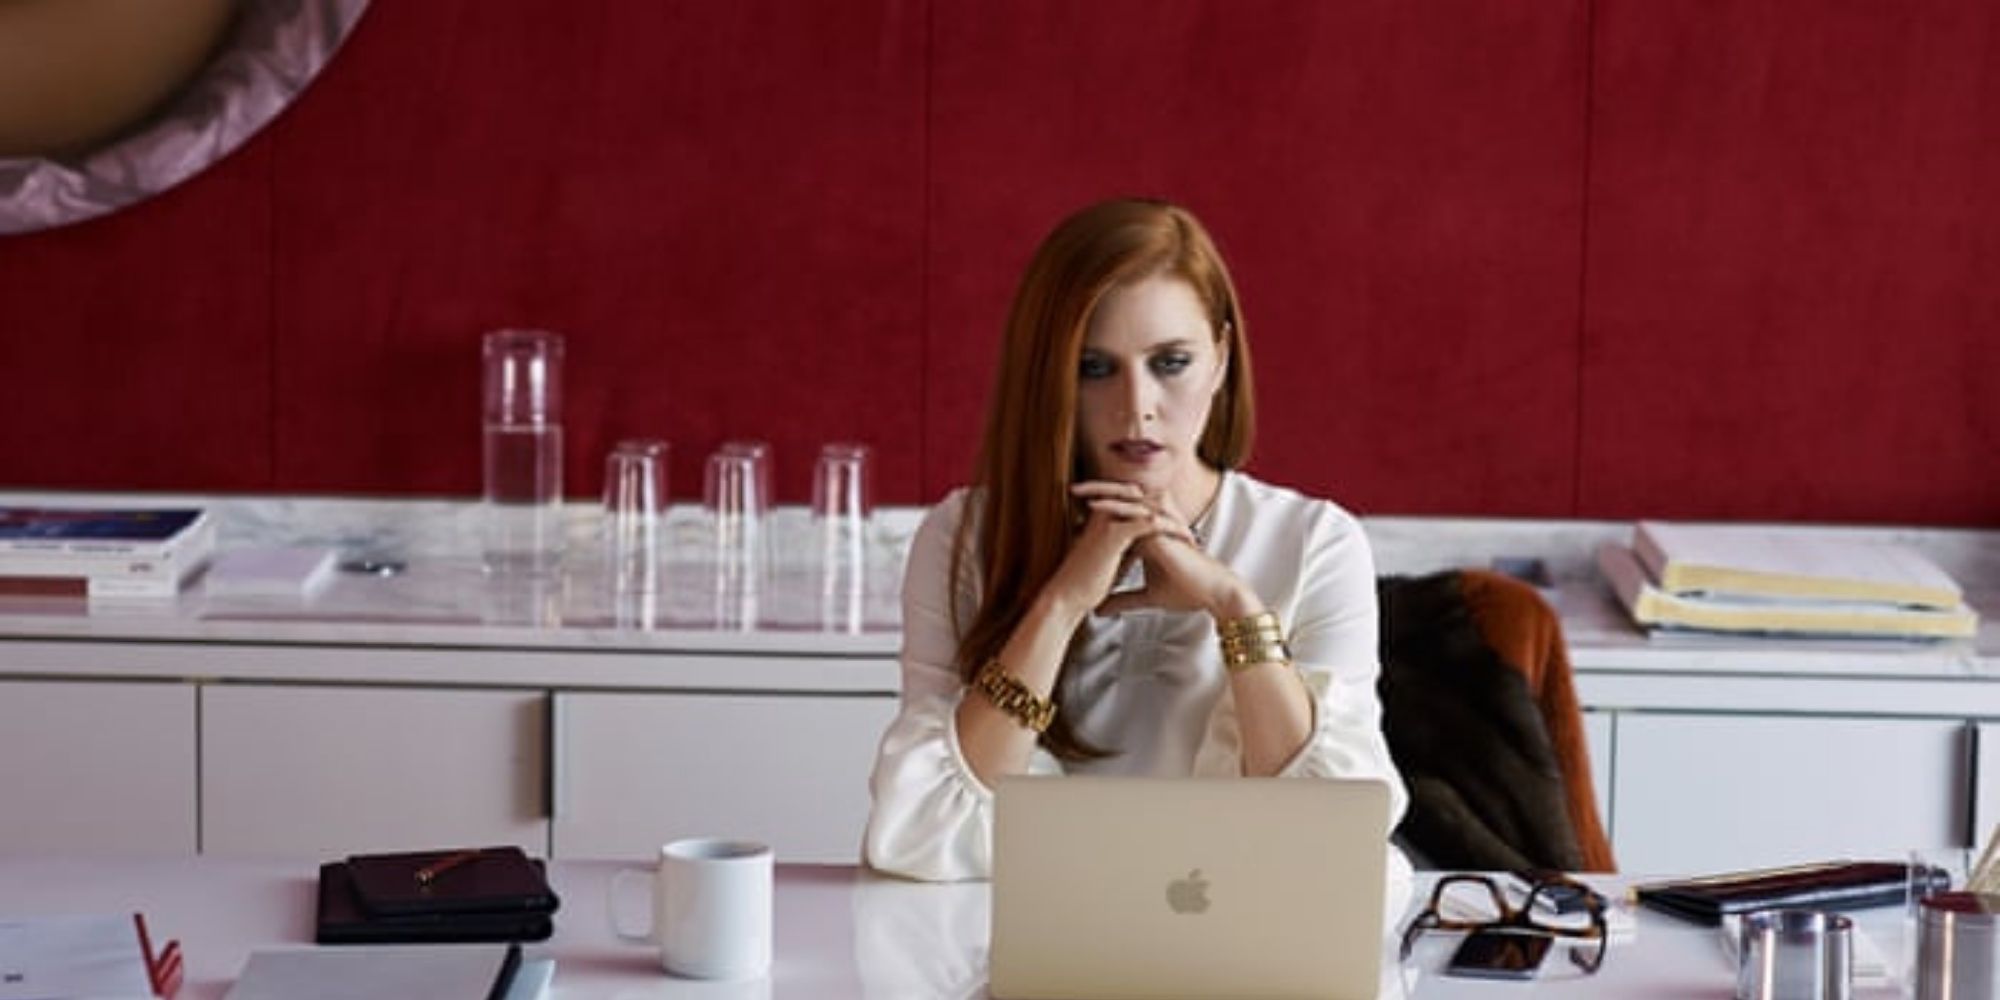 Still from the movie Nocturnal Animals.